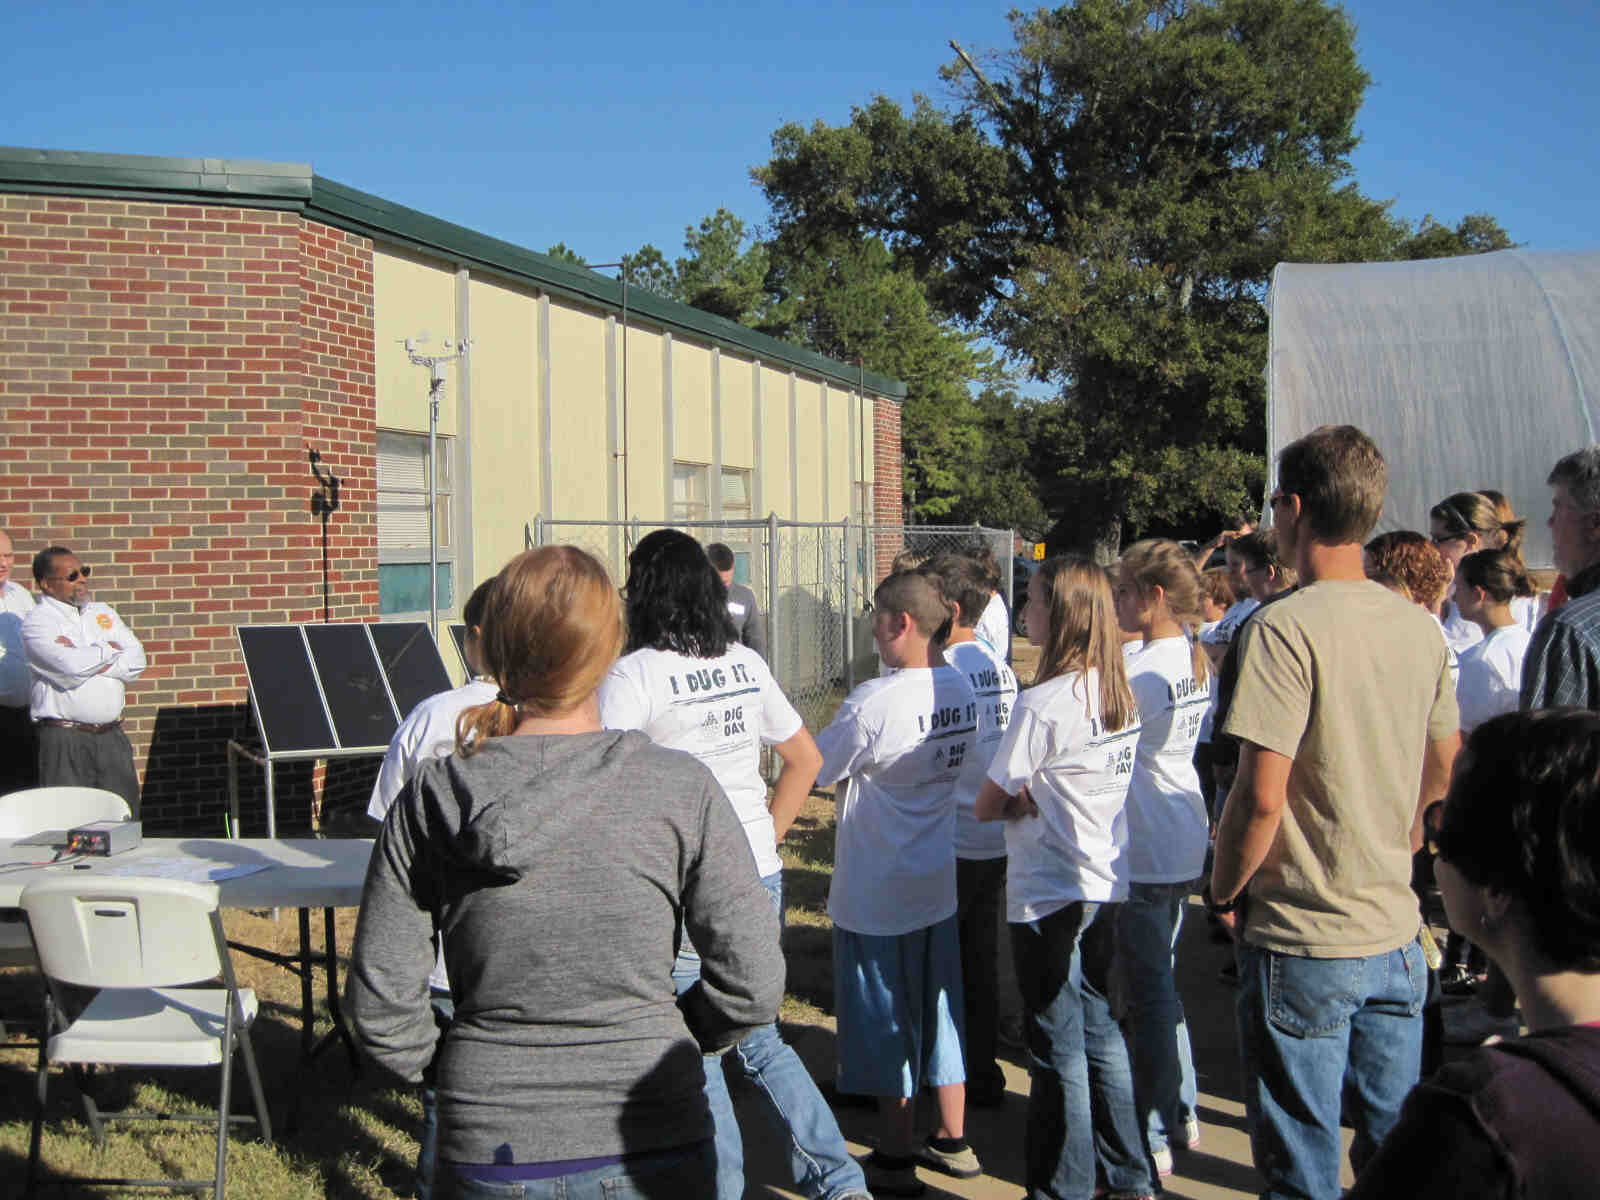 Walte Ellis a member of MAREH and expert in improving educational methods, discusses the importance of learning about technologies like solar energy and the underlying science with students.